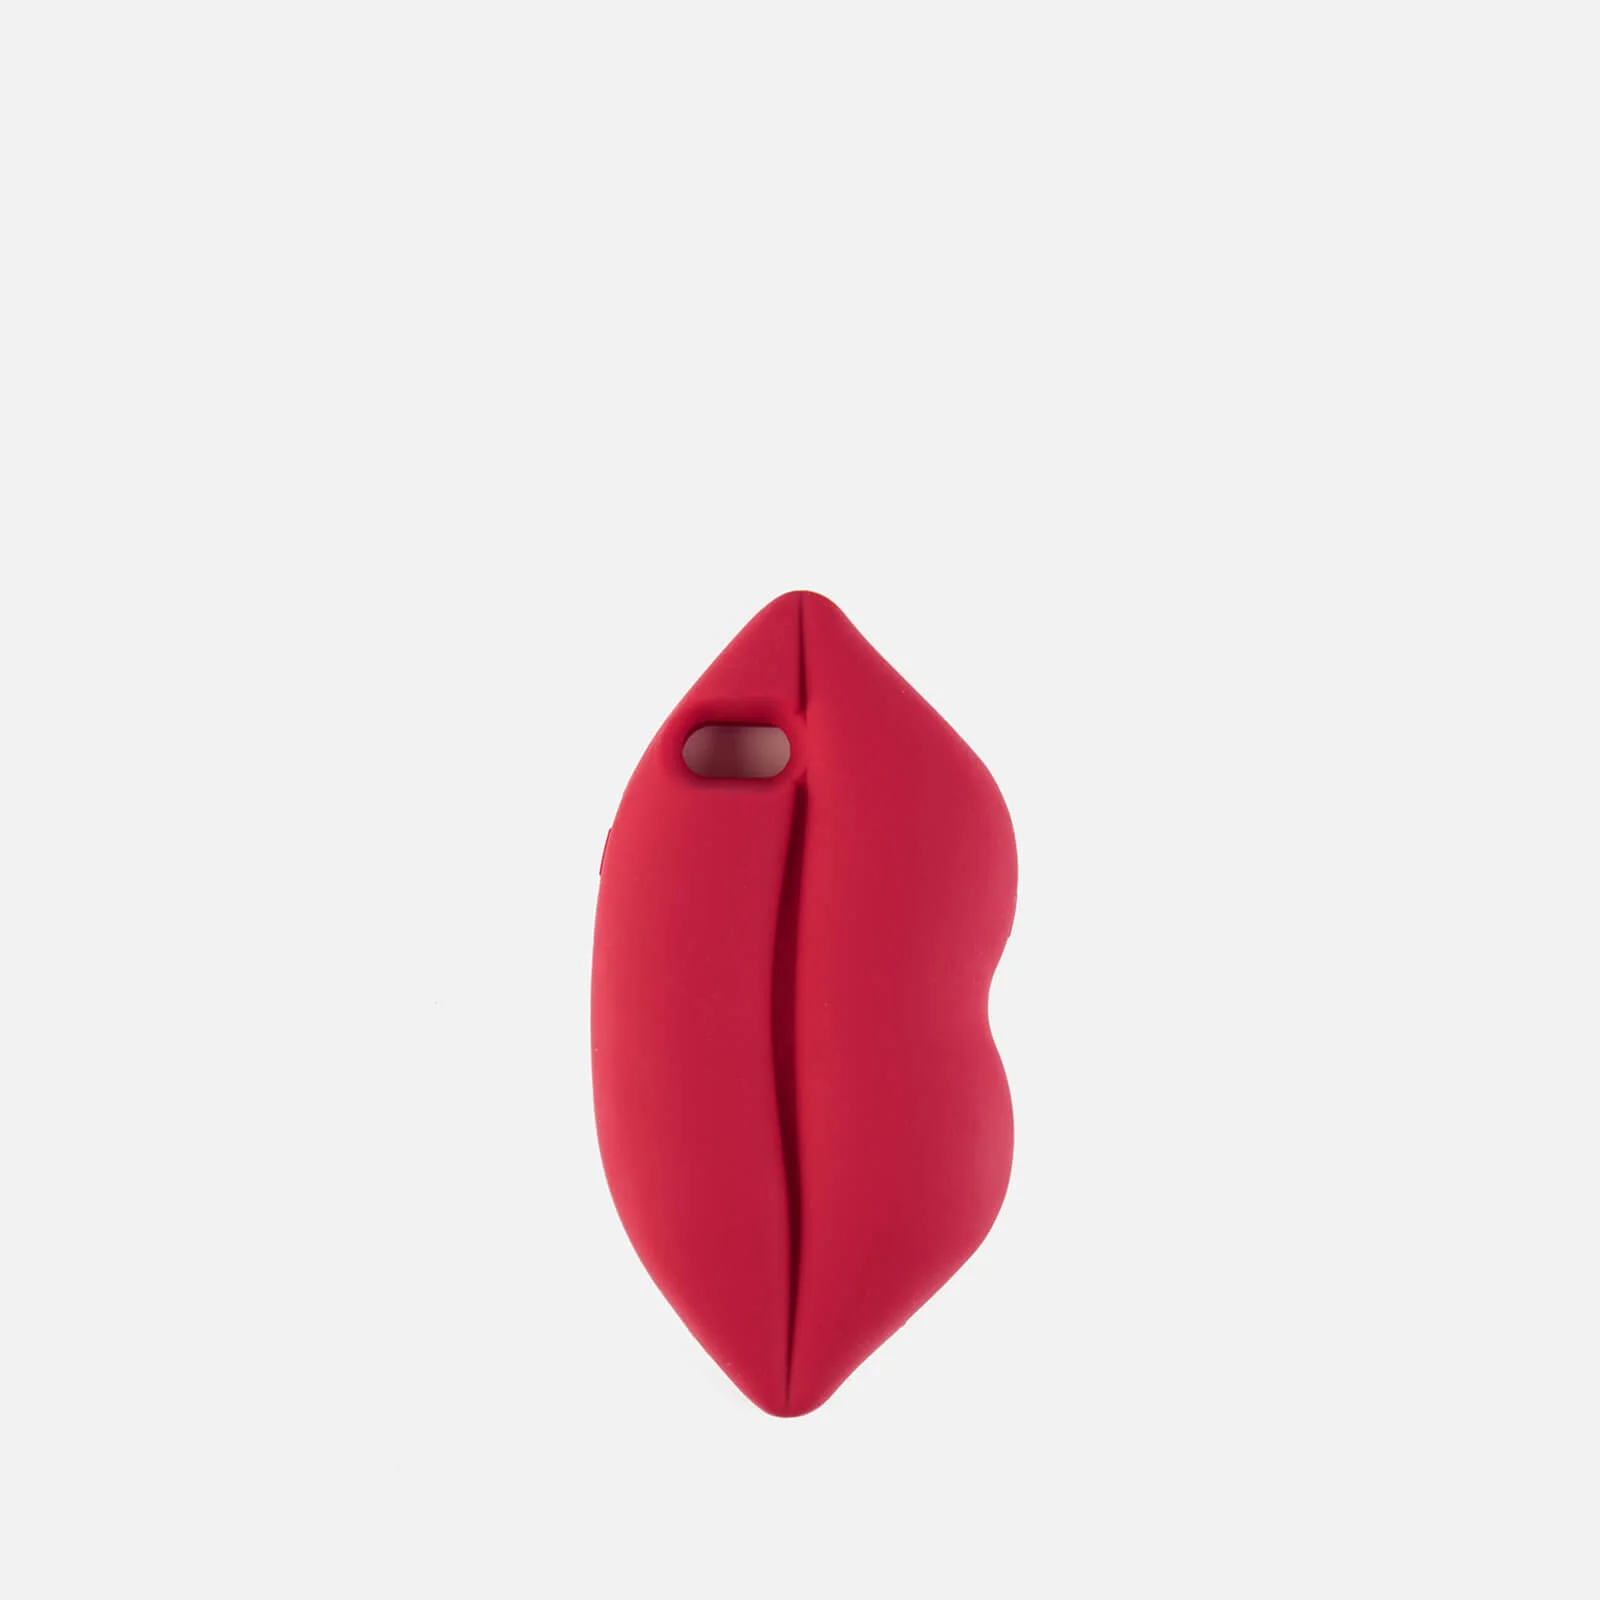 Lulu Guinness Women's Red Lip iPhone 7 Case - Red Image 1